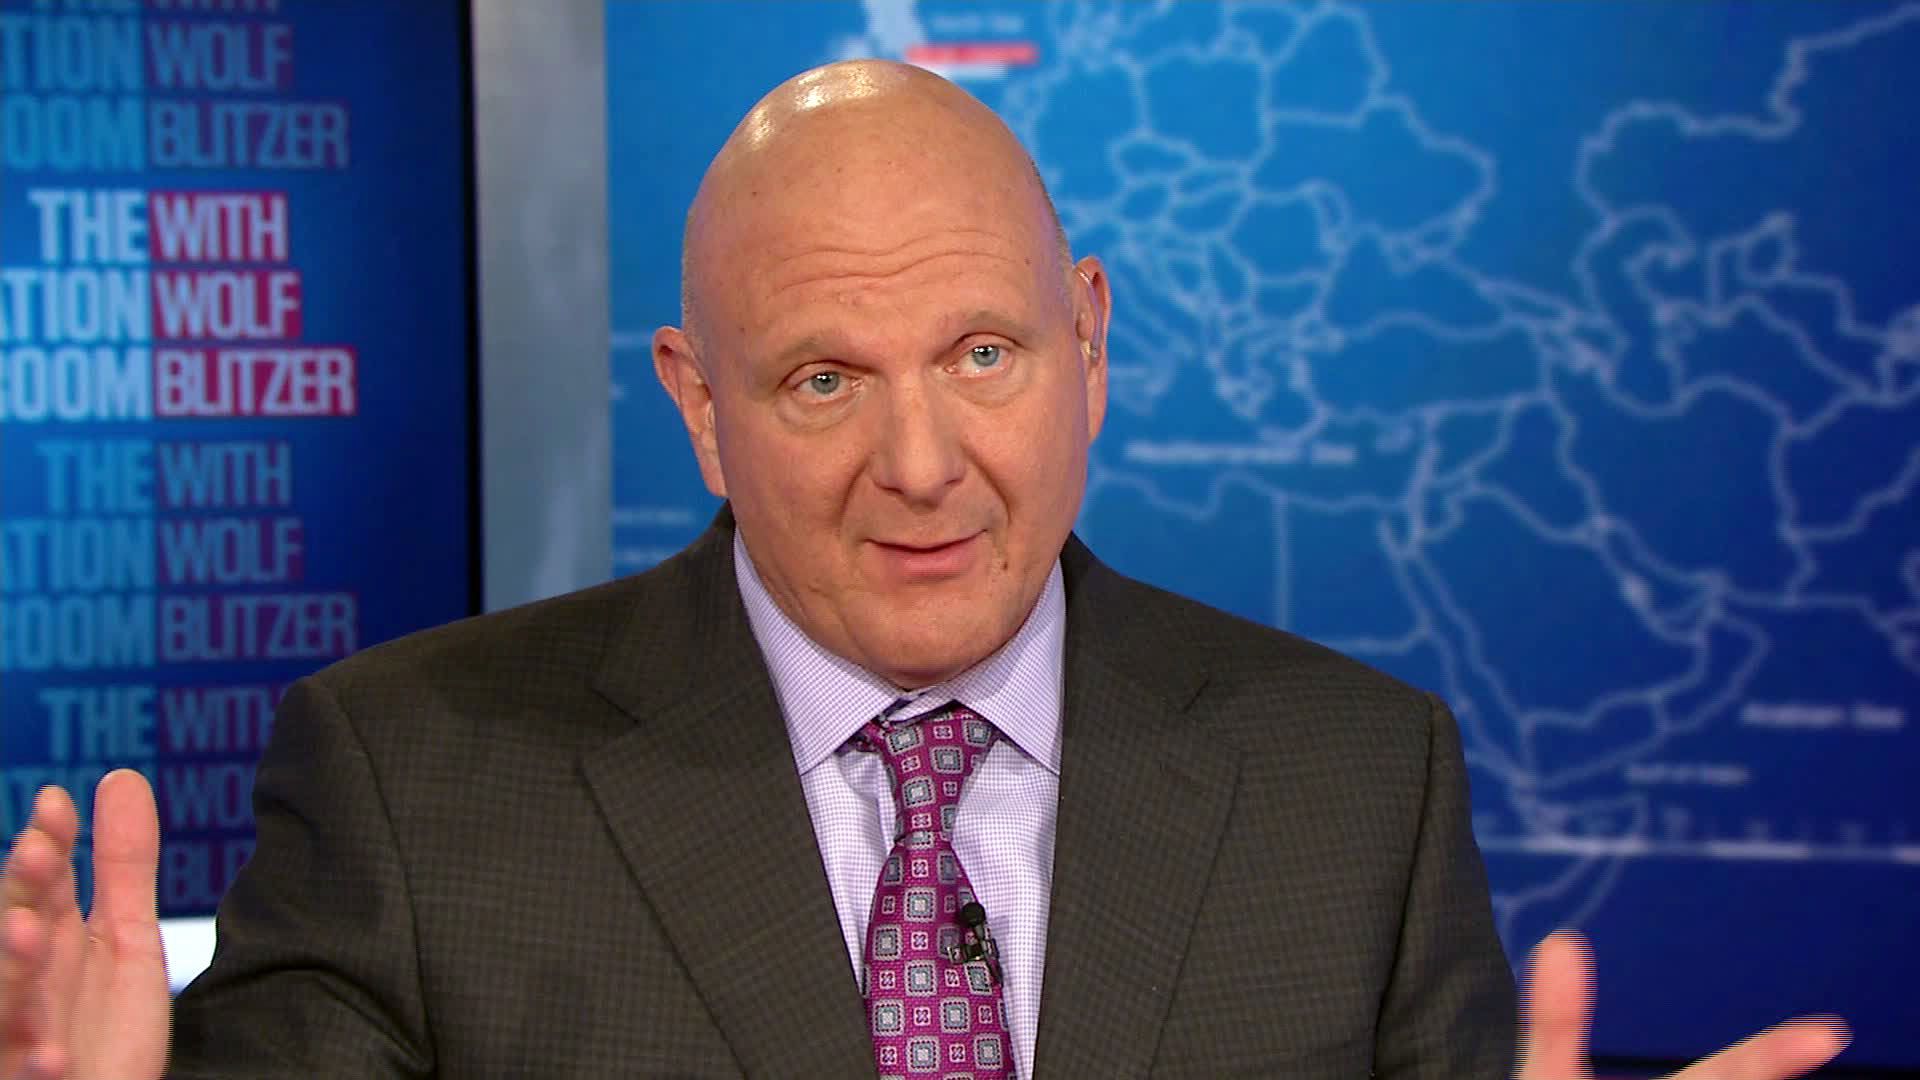 Former Microsoft CEO Steve Ballmer: Where will we get the infrastructure funding?